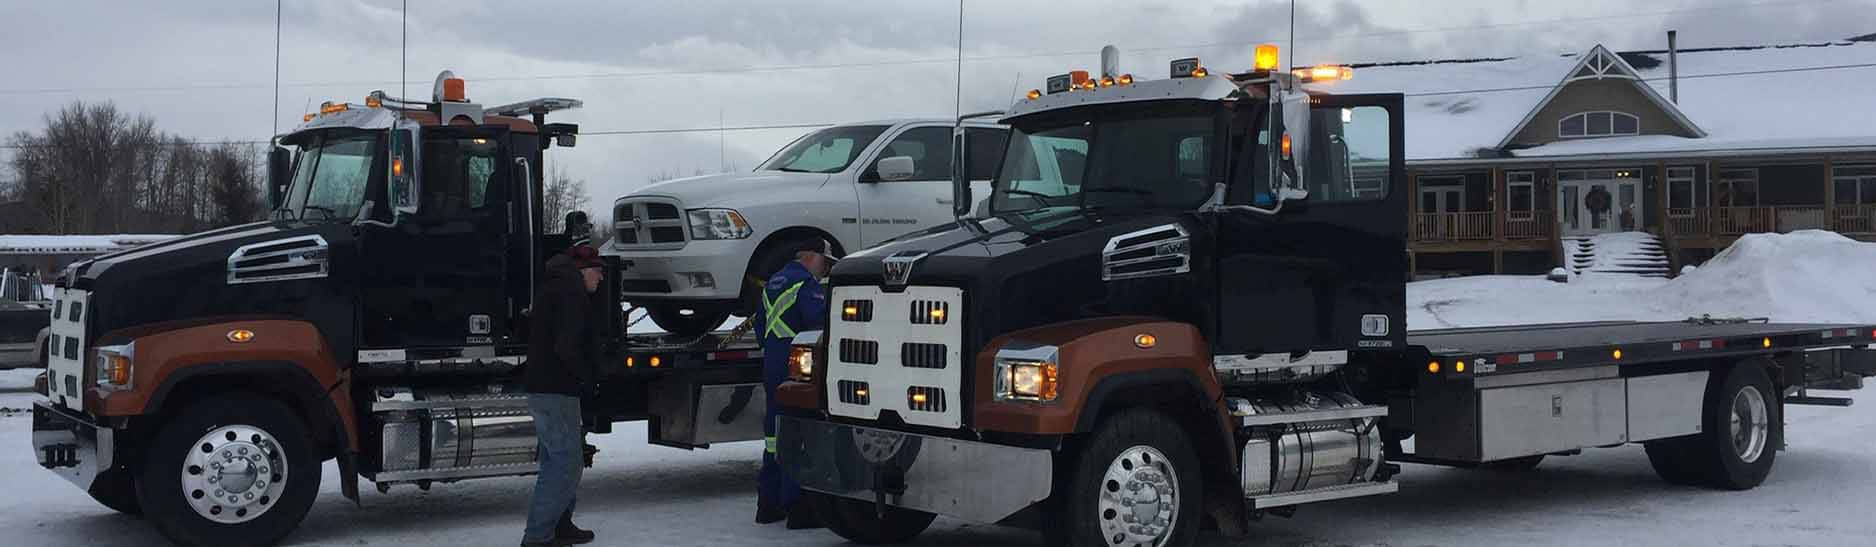 Tumbler Ridge Towing Service, Tow Truck Service and Towing Company